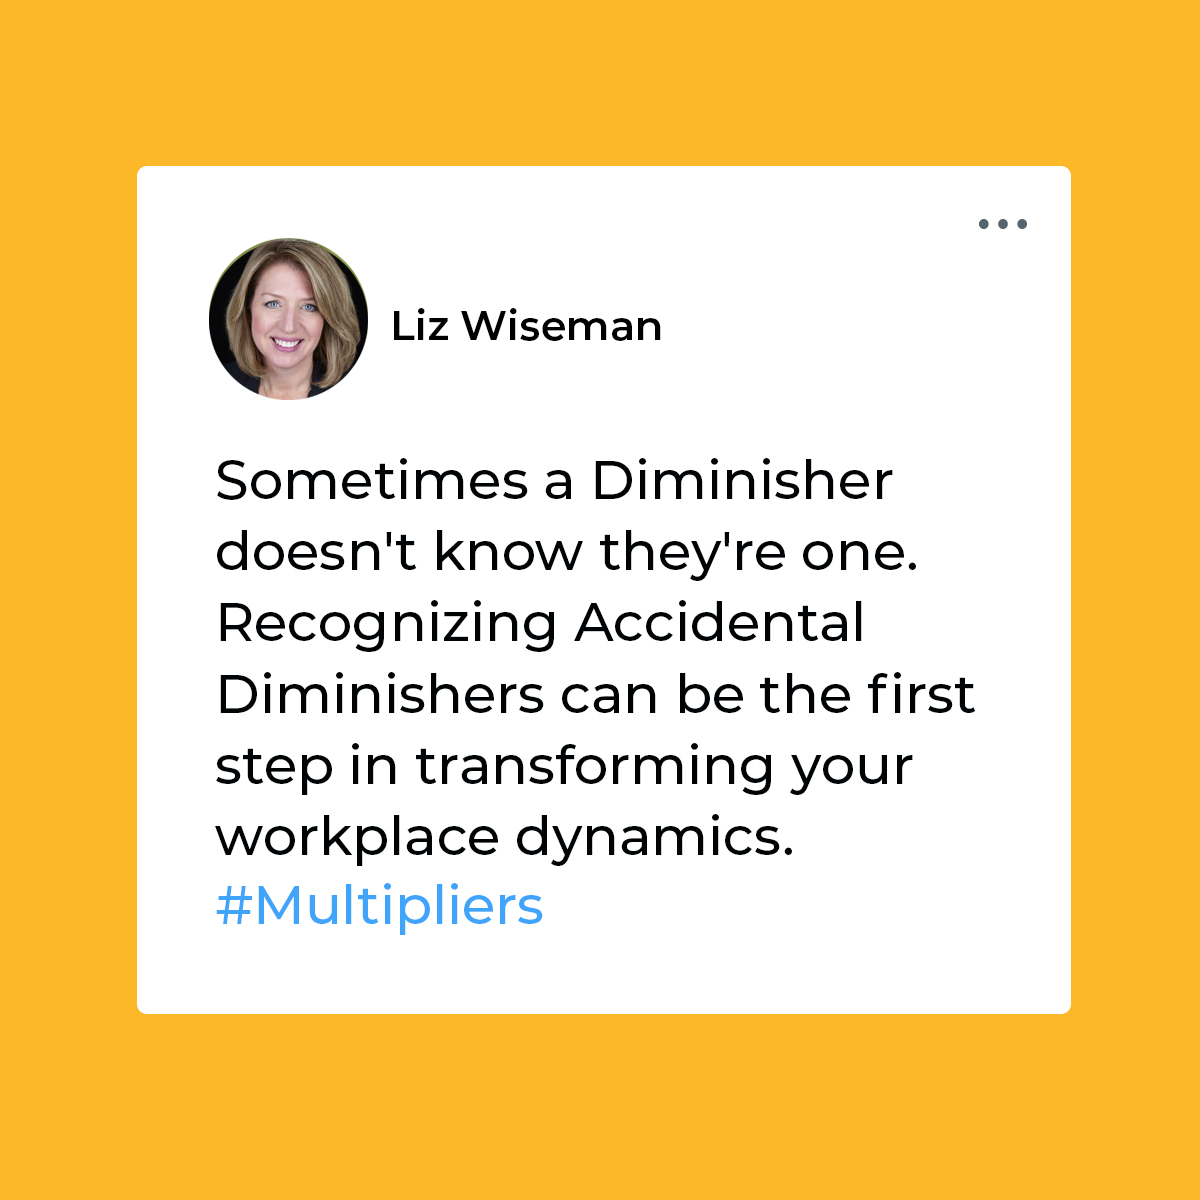 Accidental Diminishers might not realize they're holding you back. Point out the impacts gently and suggest better approaches. This nurtures awareness and promotes a culture of supportive leadership. #Multipliers